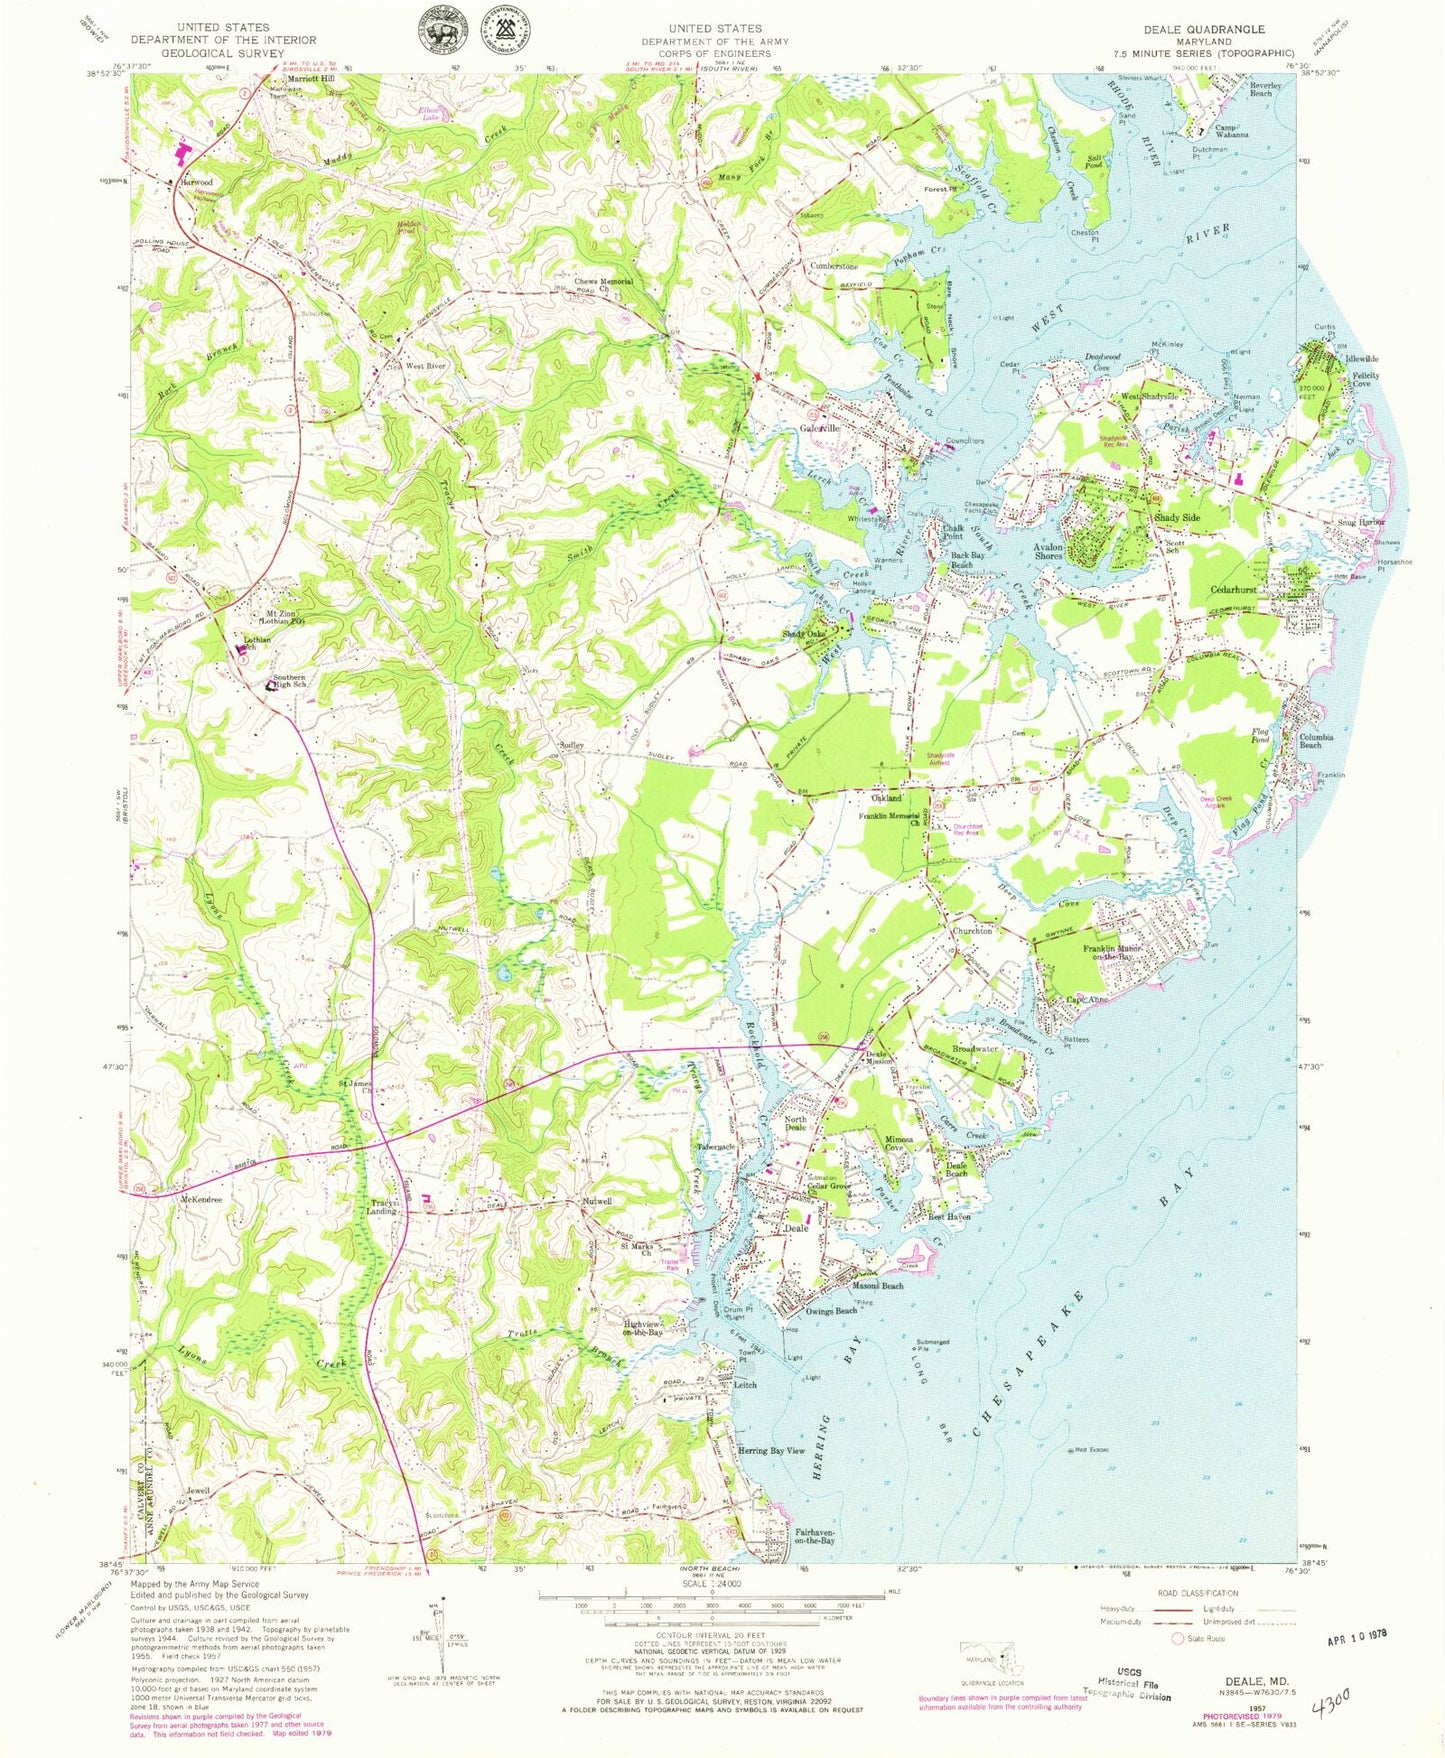 Classic USGS Deale Maryland 7.5'x7.5' Topo Map Image